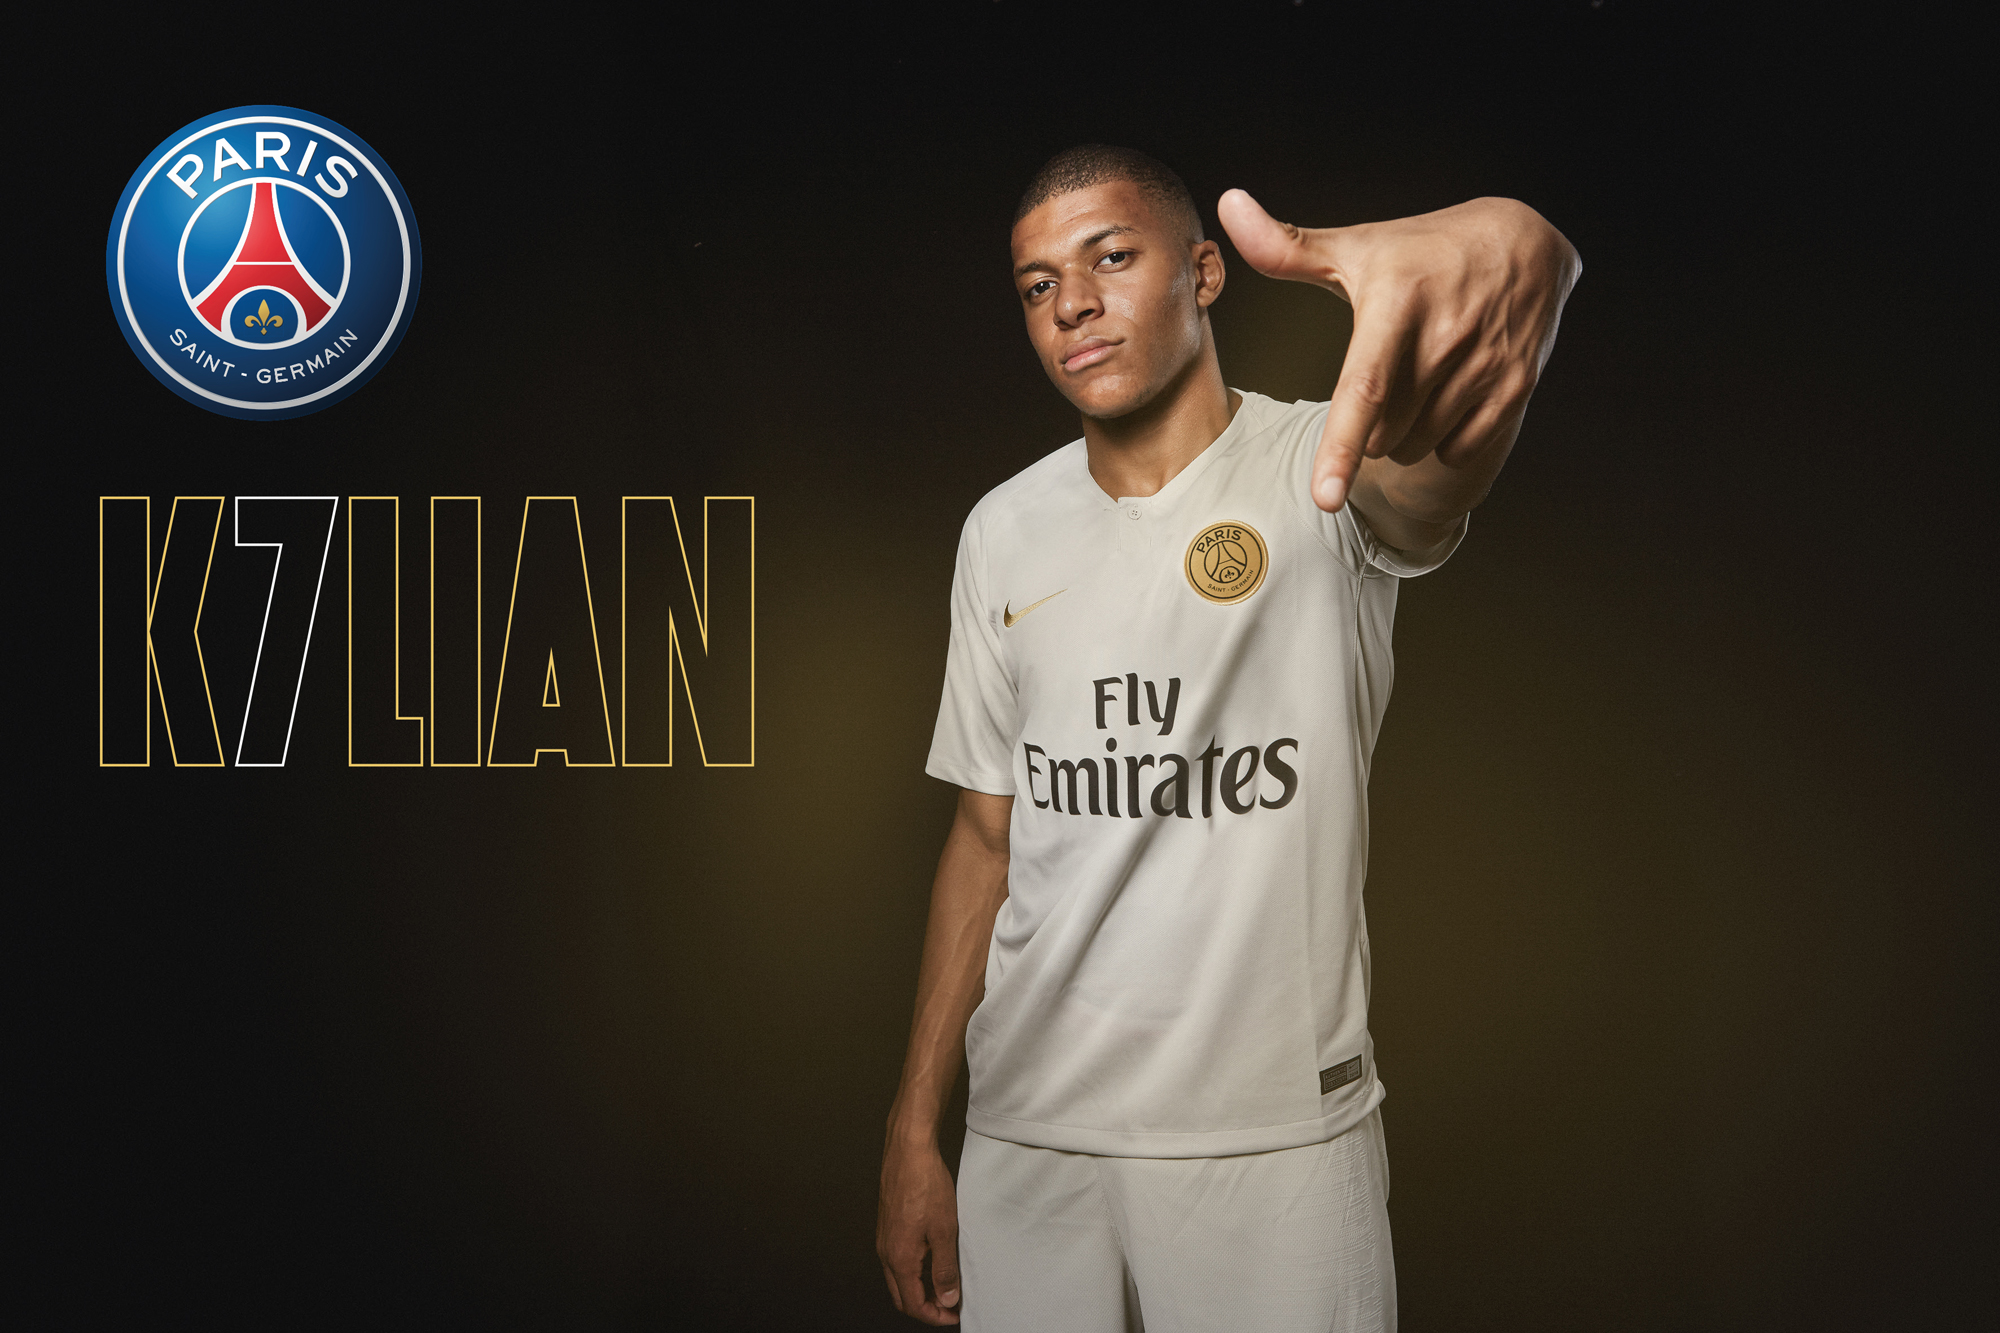 Maillot THIRD PSG Kylian MBAPPE